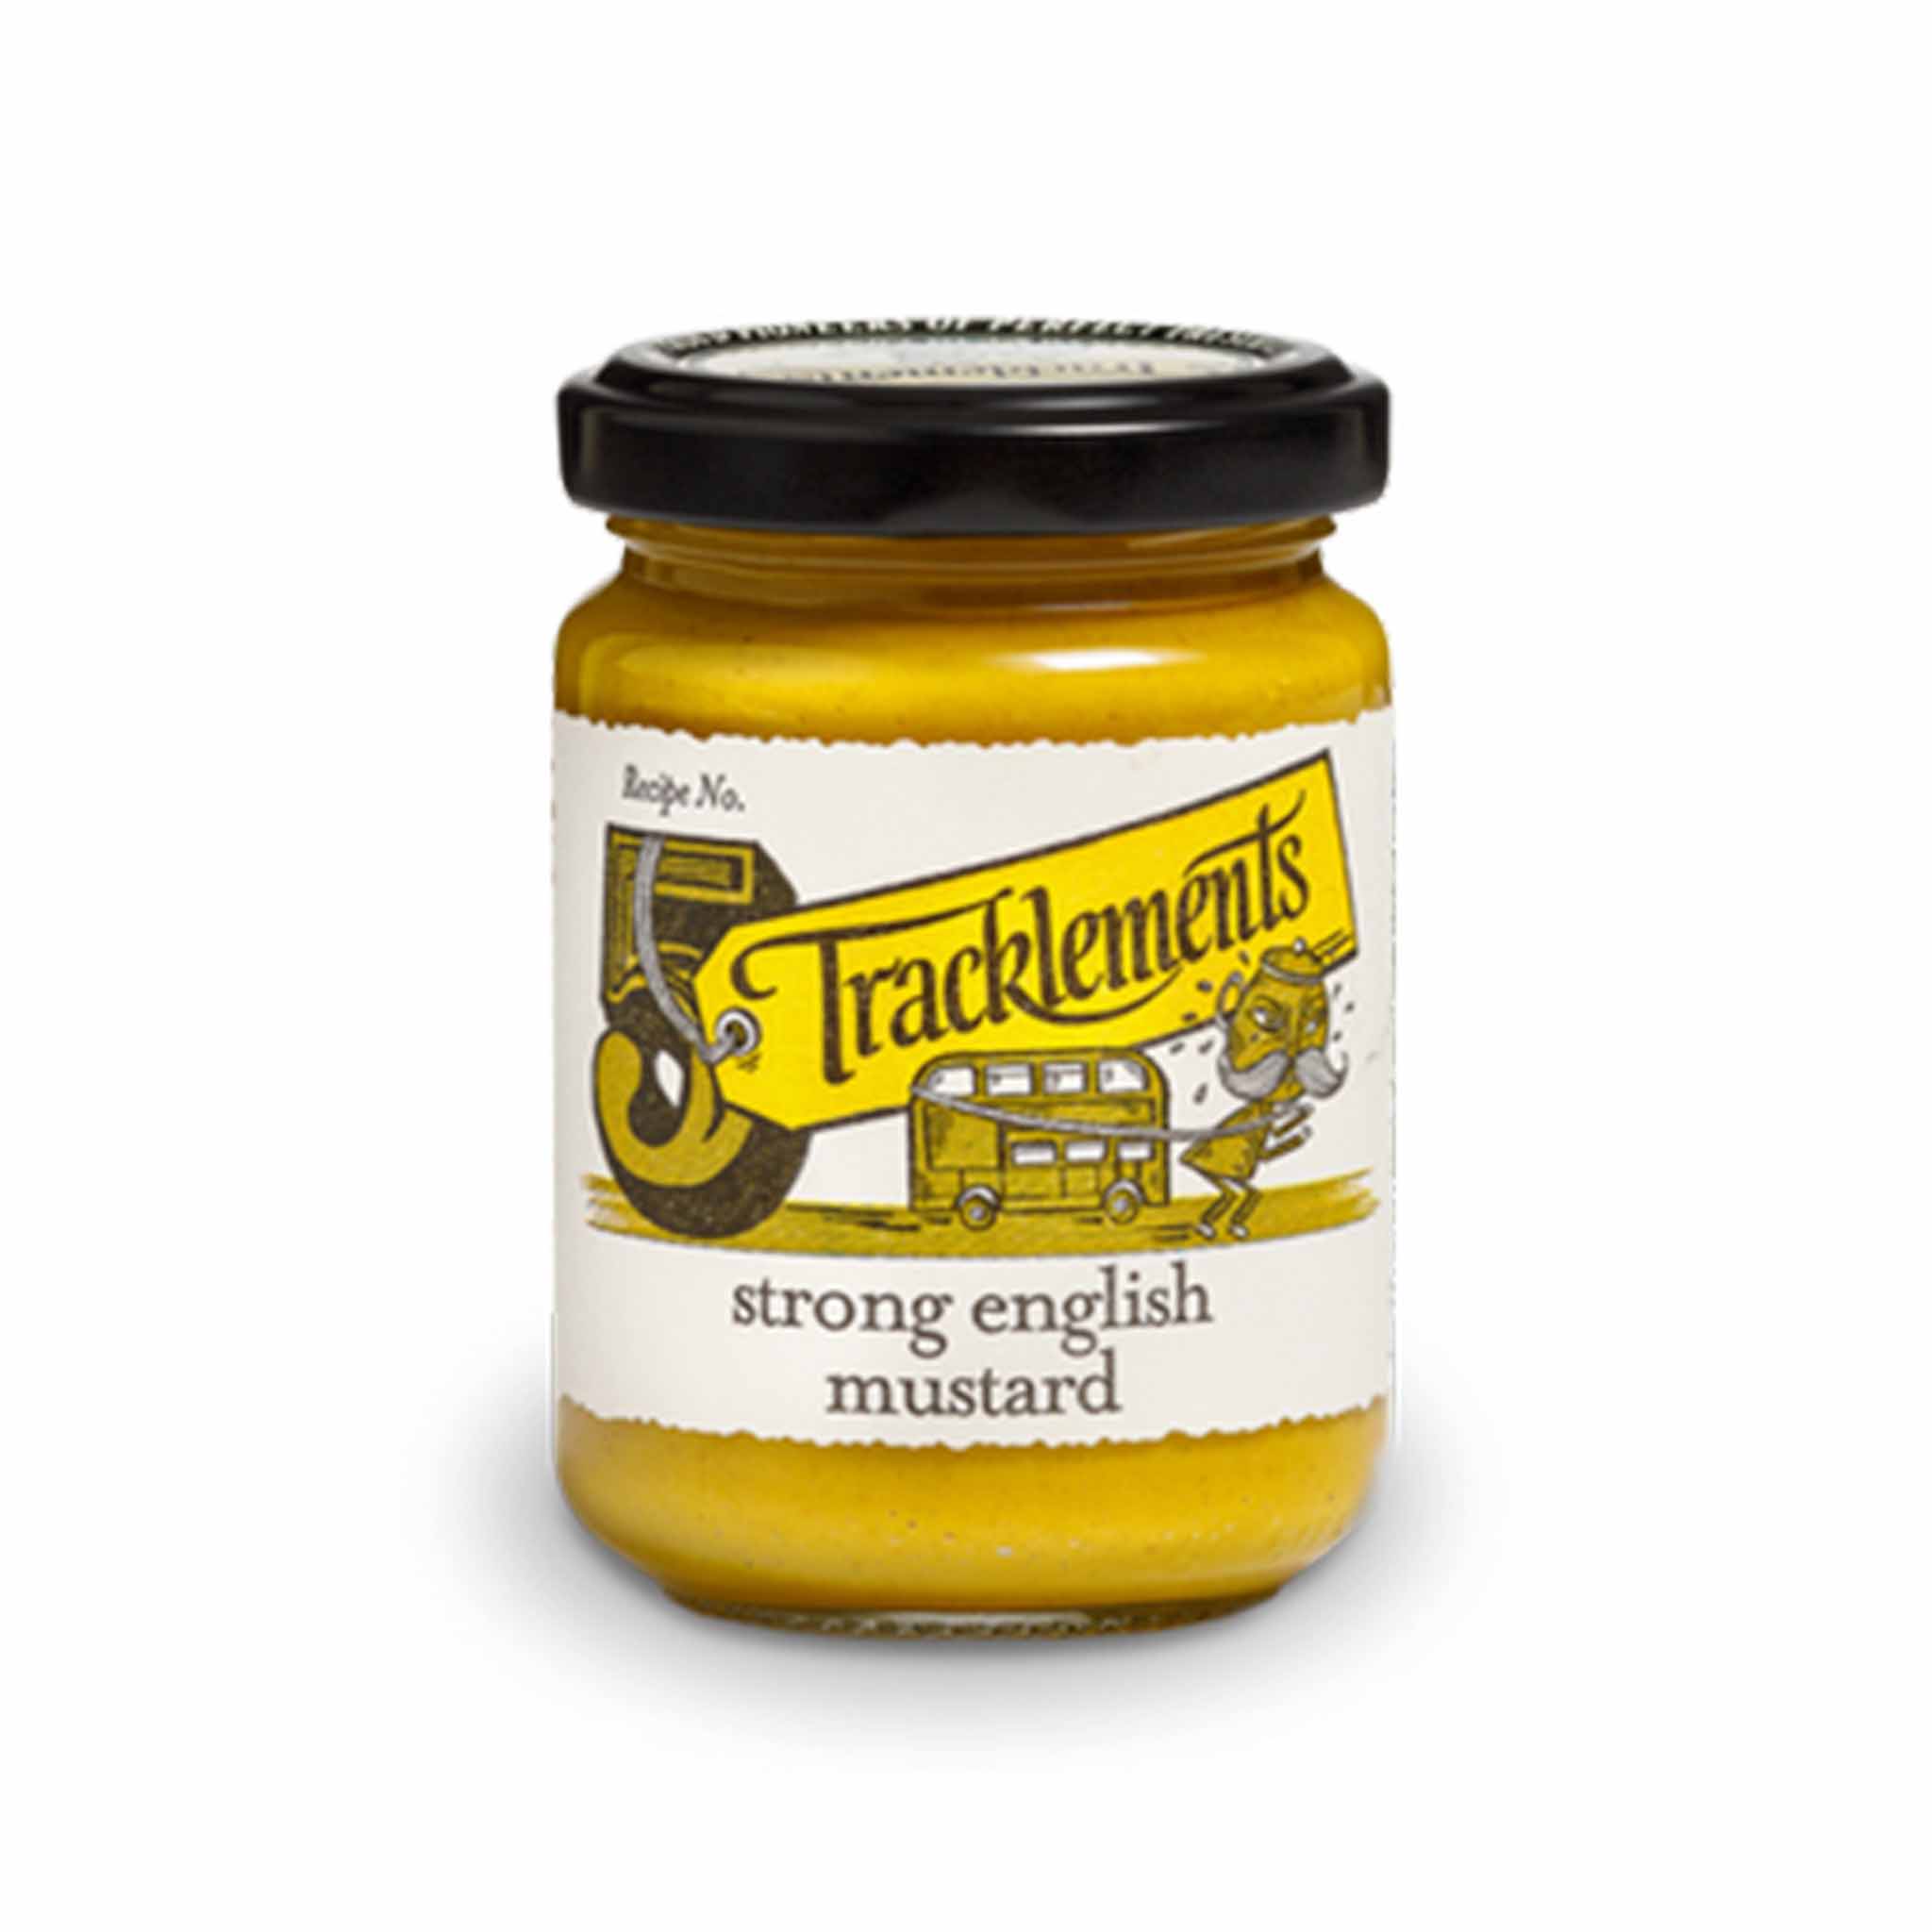 Tracklements Strong English Mustard in a Glass Jar